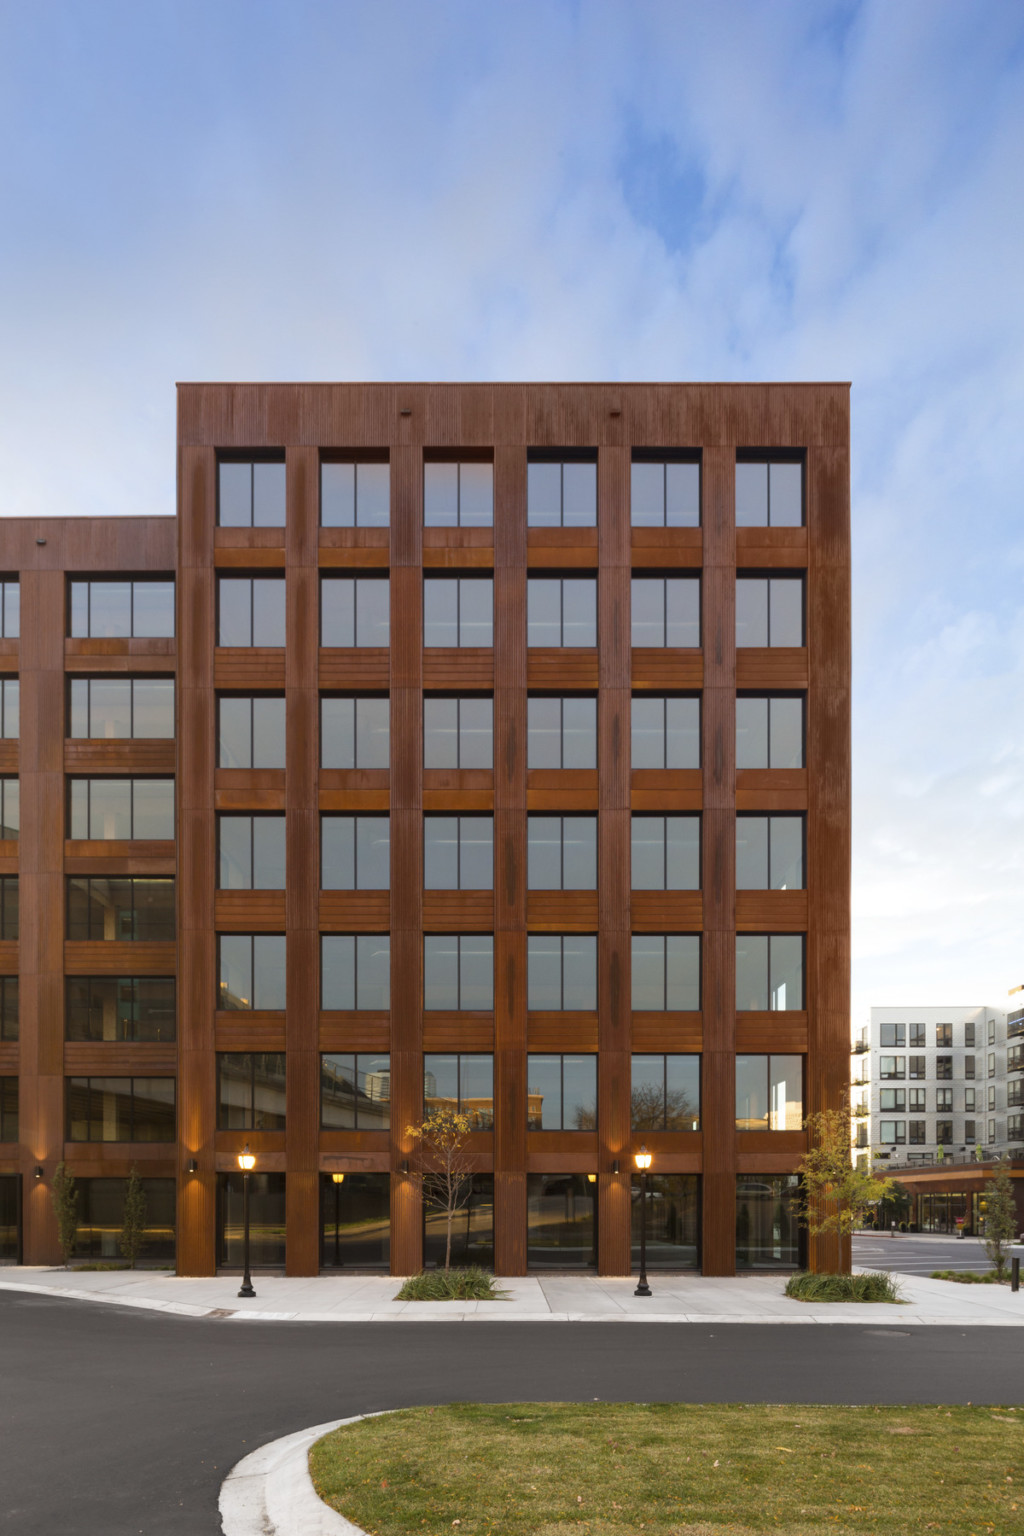 looking at the first mass timber T3 building in the US with warm exterior facade